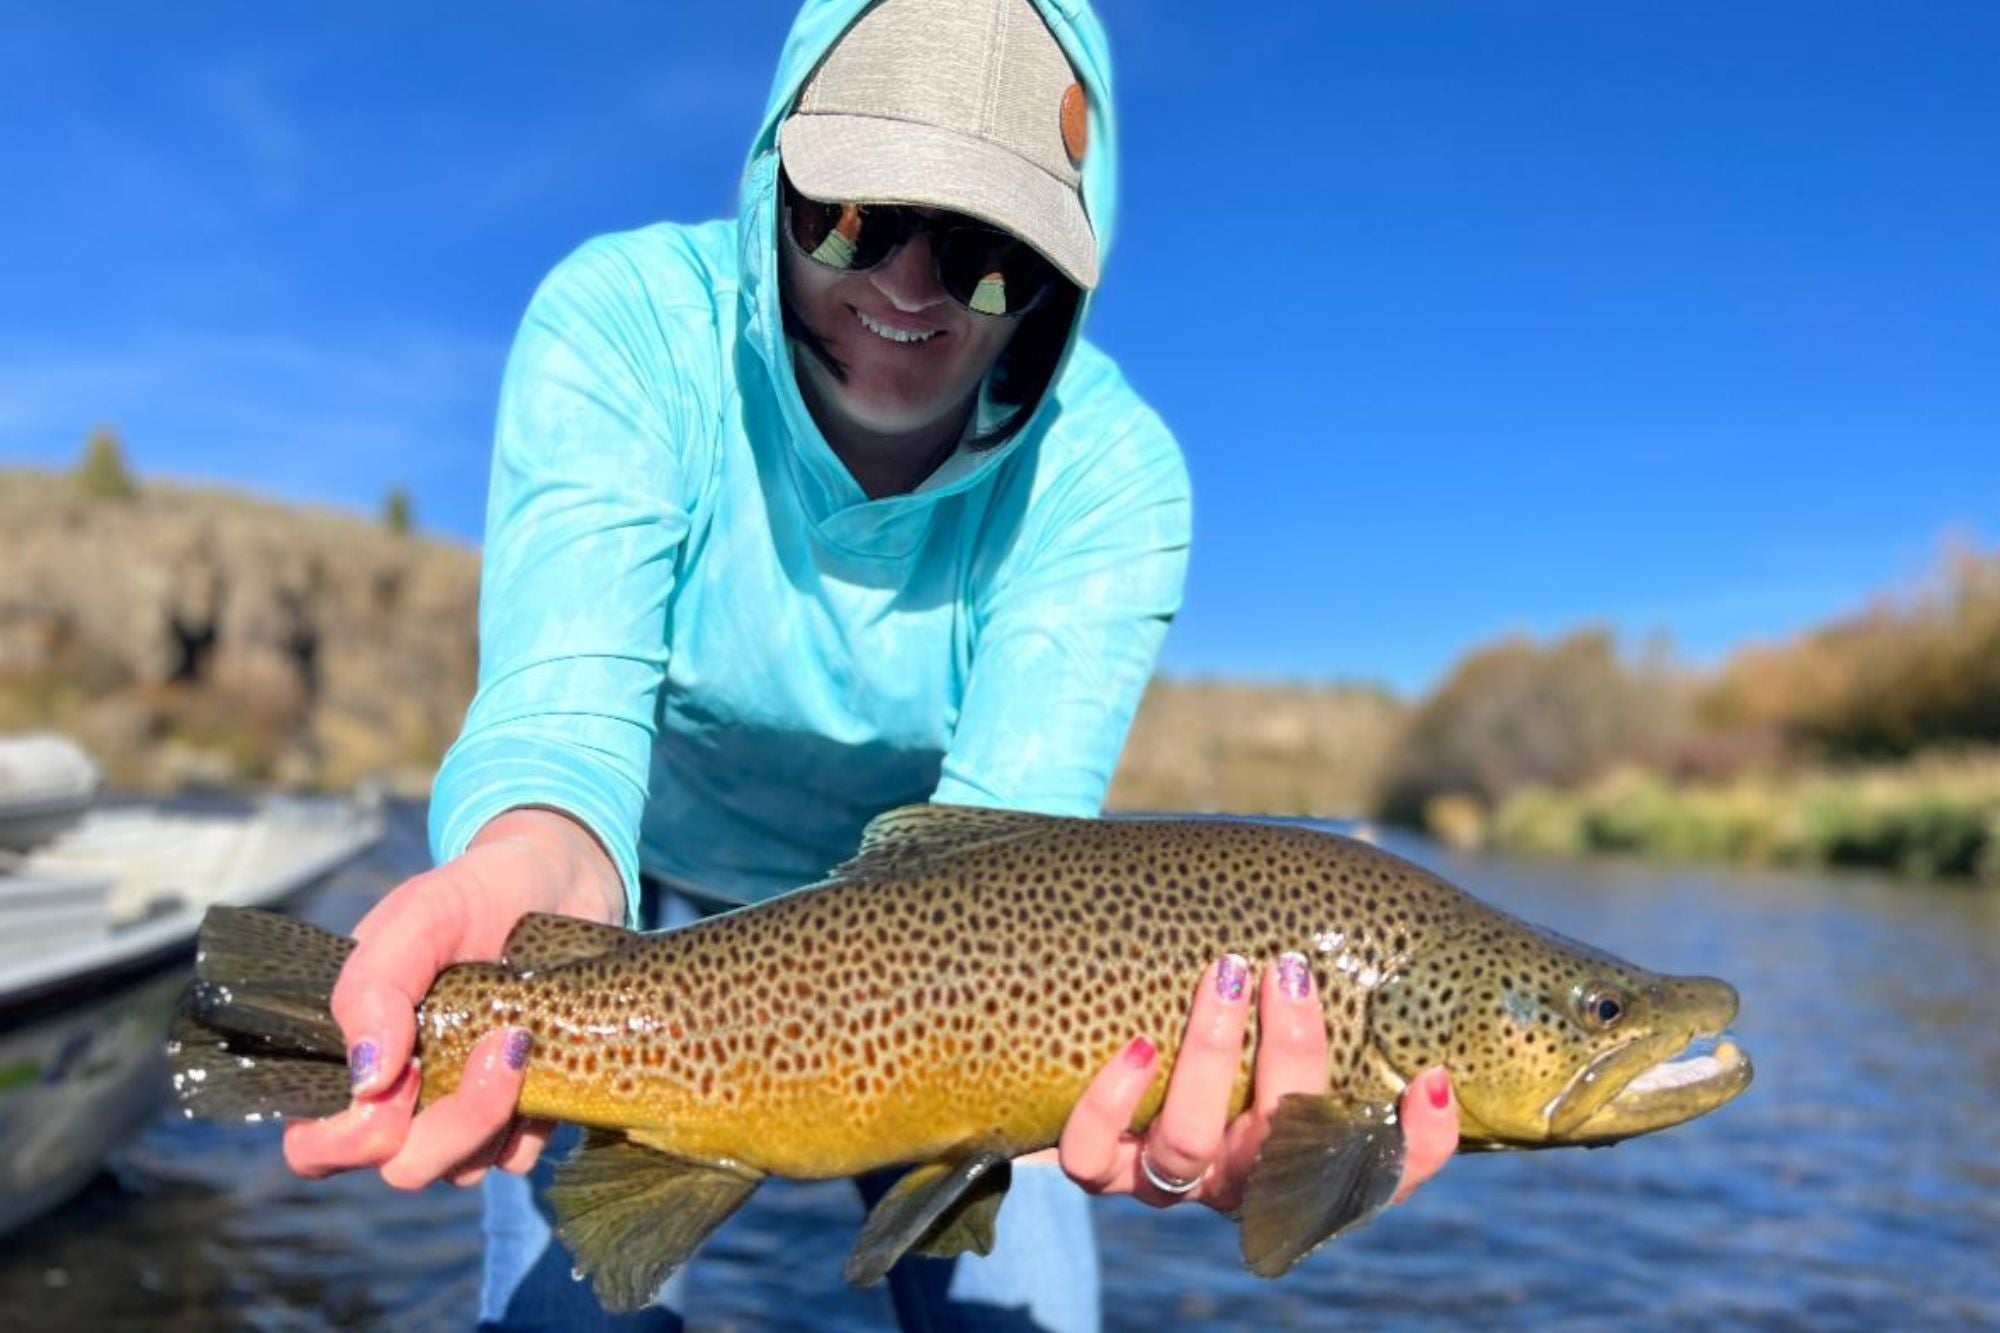 Madison River Report - October 20, 2022